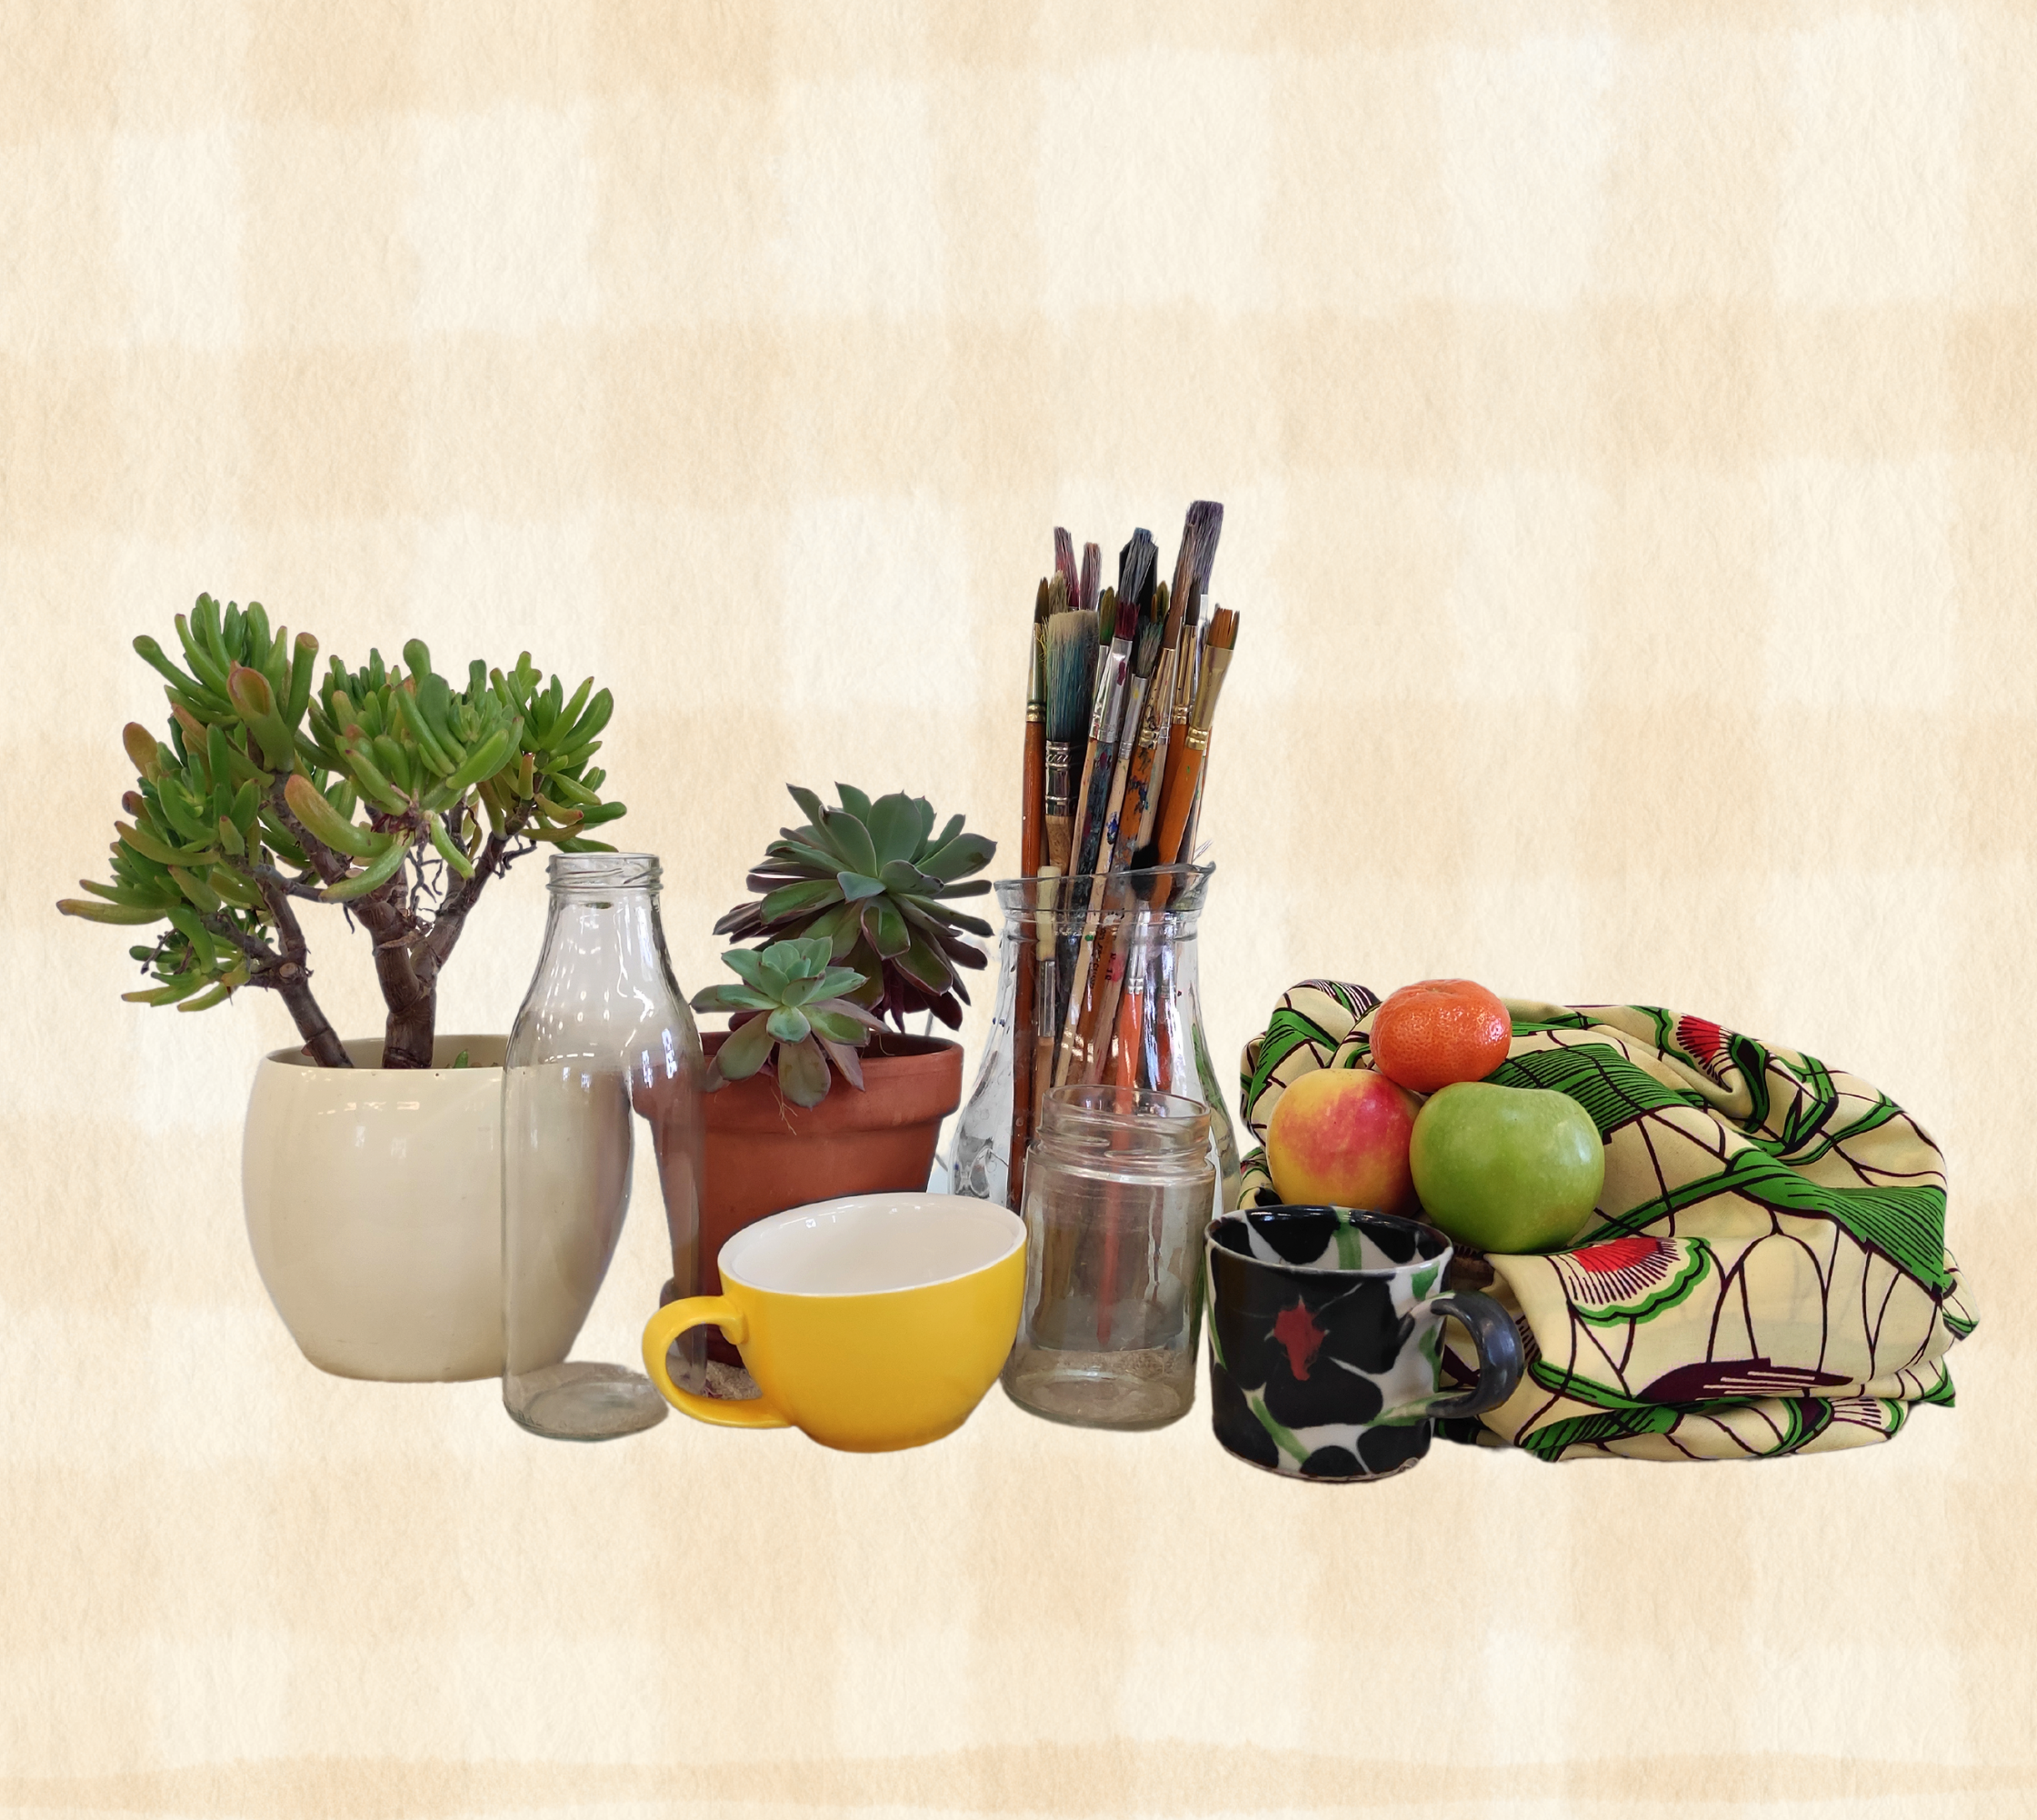 a collection of plants, cup and paintbrushes against a table cloth design background.s, fruit, bottles